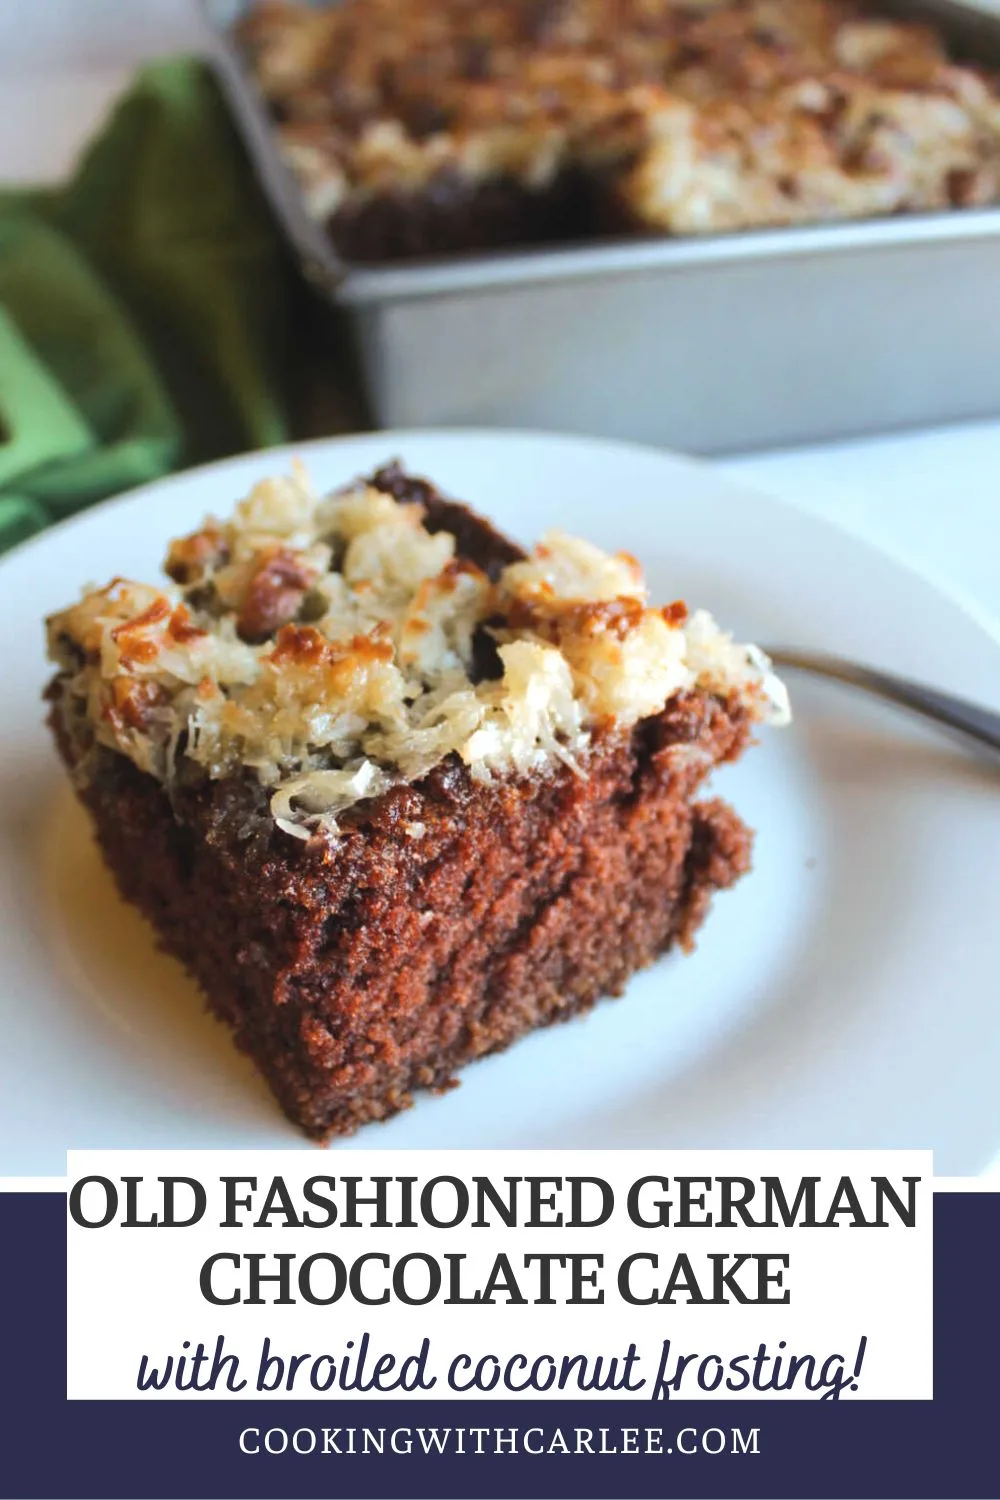 Great-grandma's German chocolate cake recipe was topped with broiled coconut frosting. It may be different than you are used to, but it's really good. The broiler toasts the coconuts and pecans a bit and makes for a really tasty dessert.